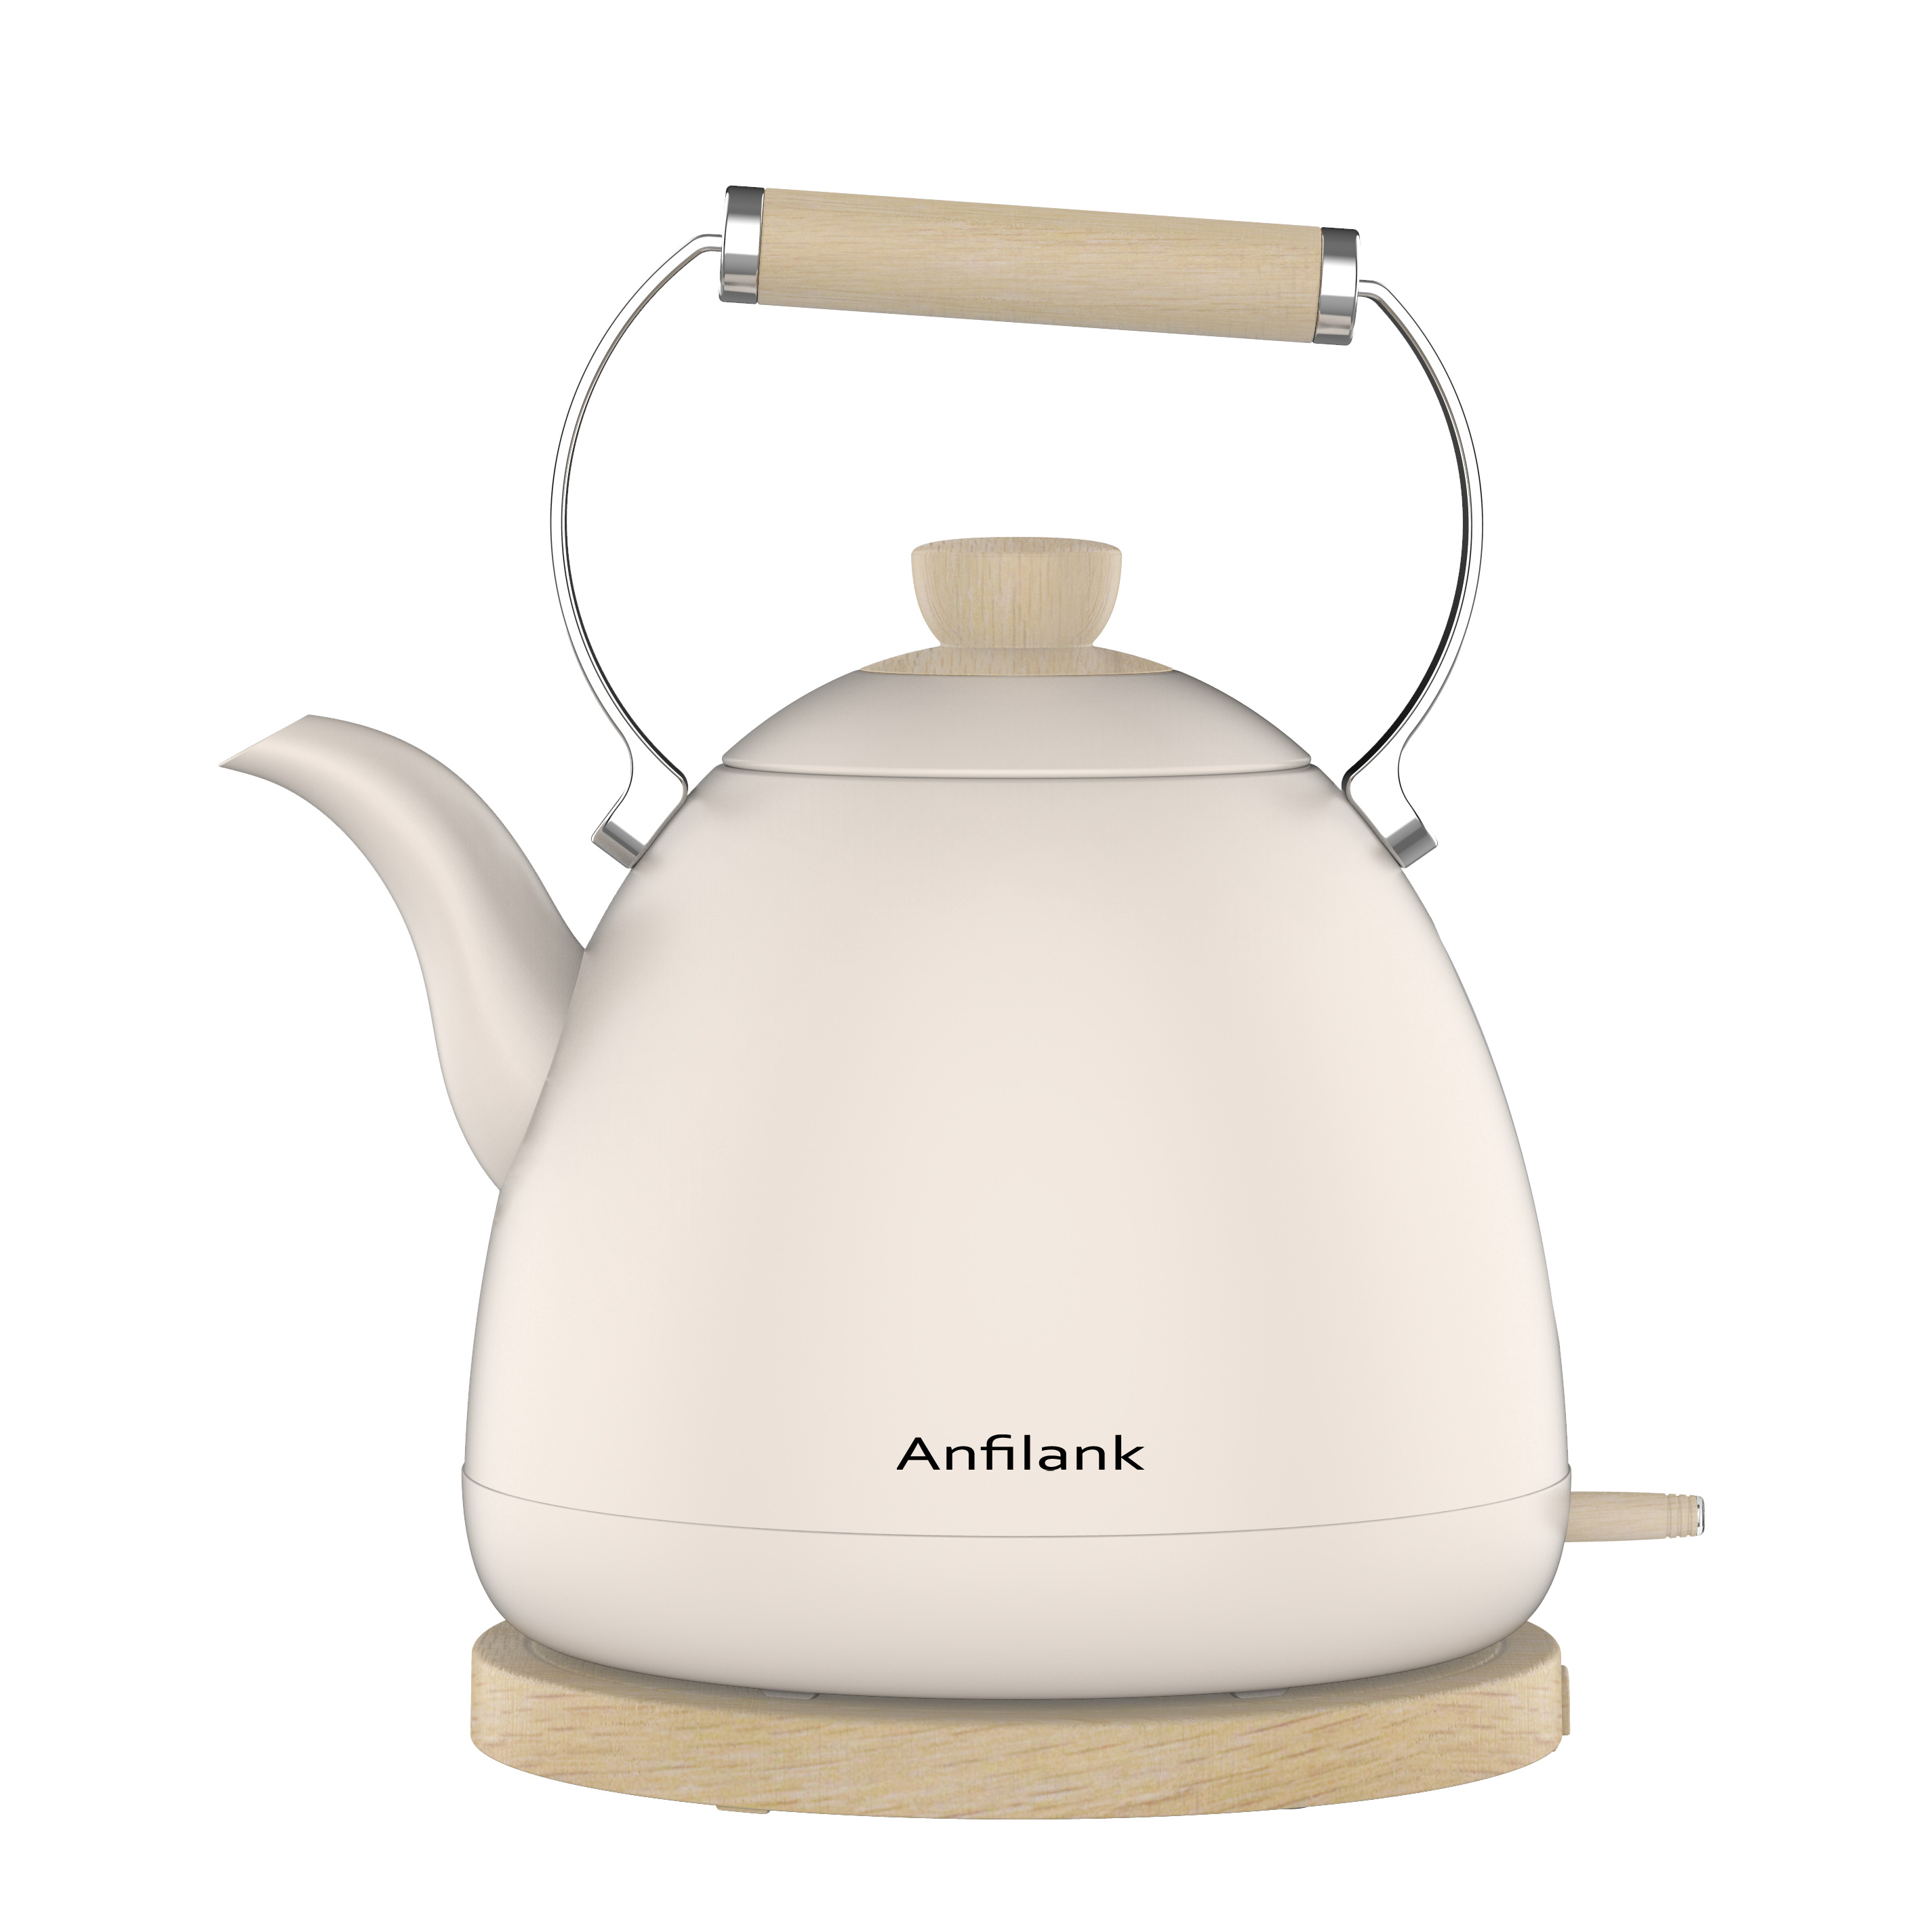 Dezin Electric Kettle with Keep Warm Function, BPA Free Window-Glass Double  Wall